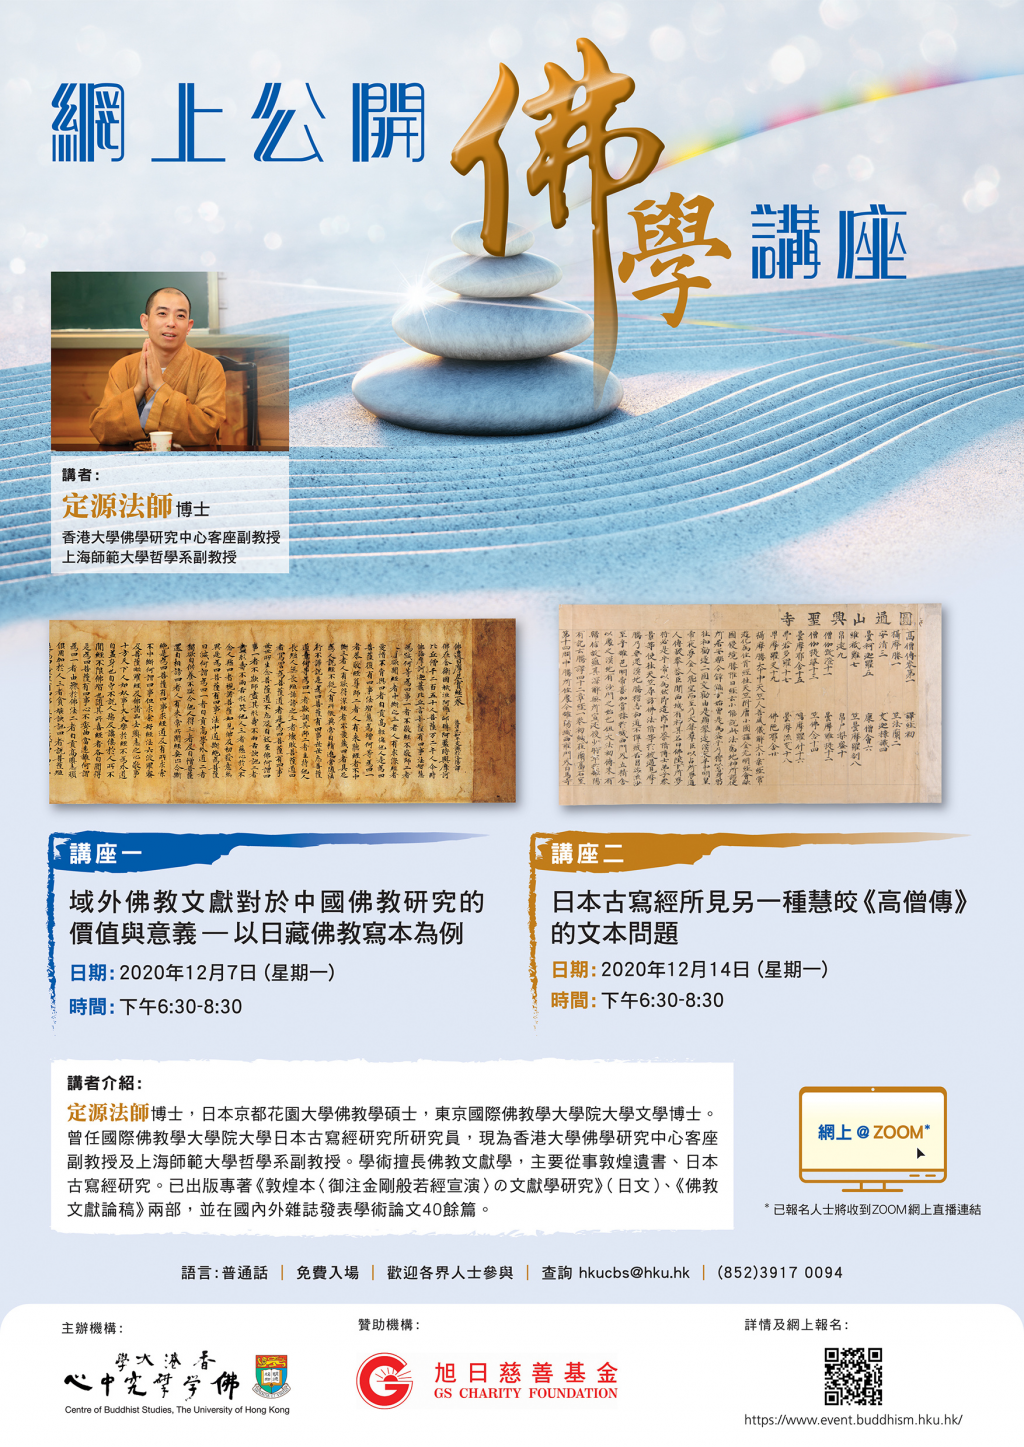 Dec 7&14-Online Buddhist Lectures by Ven. Dr. Ding Yuan